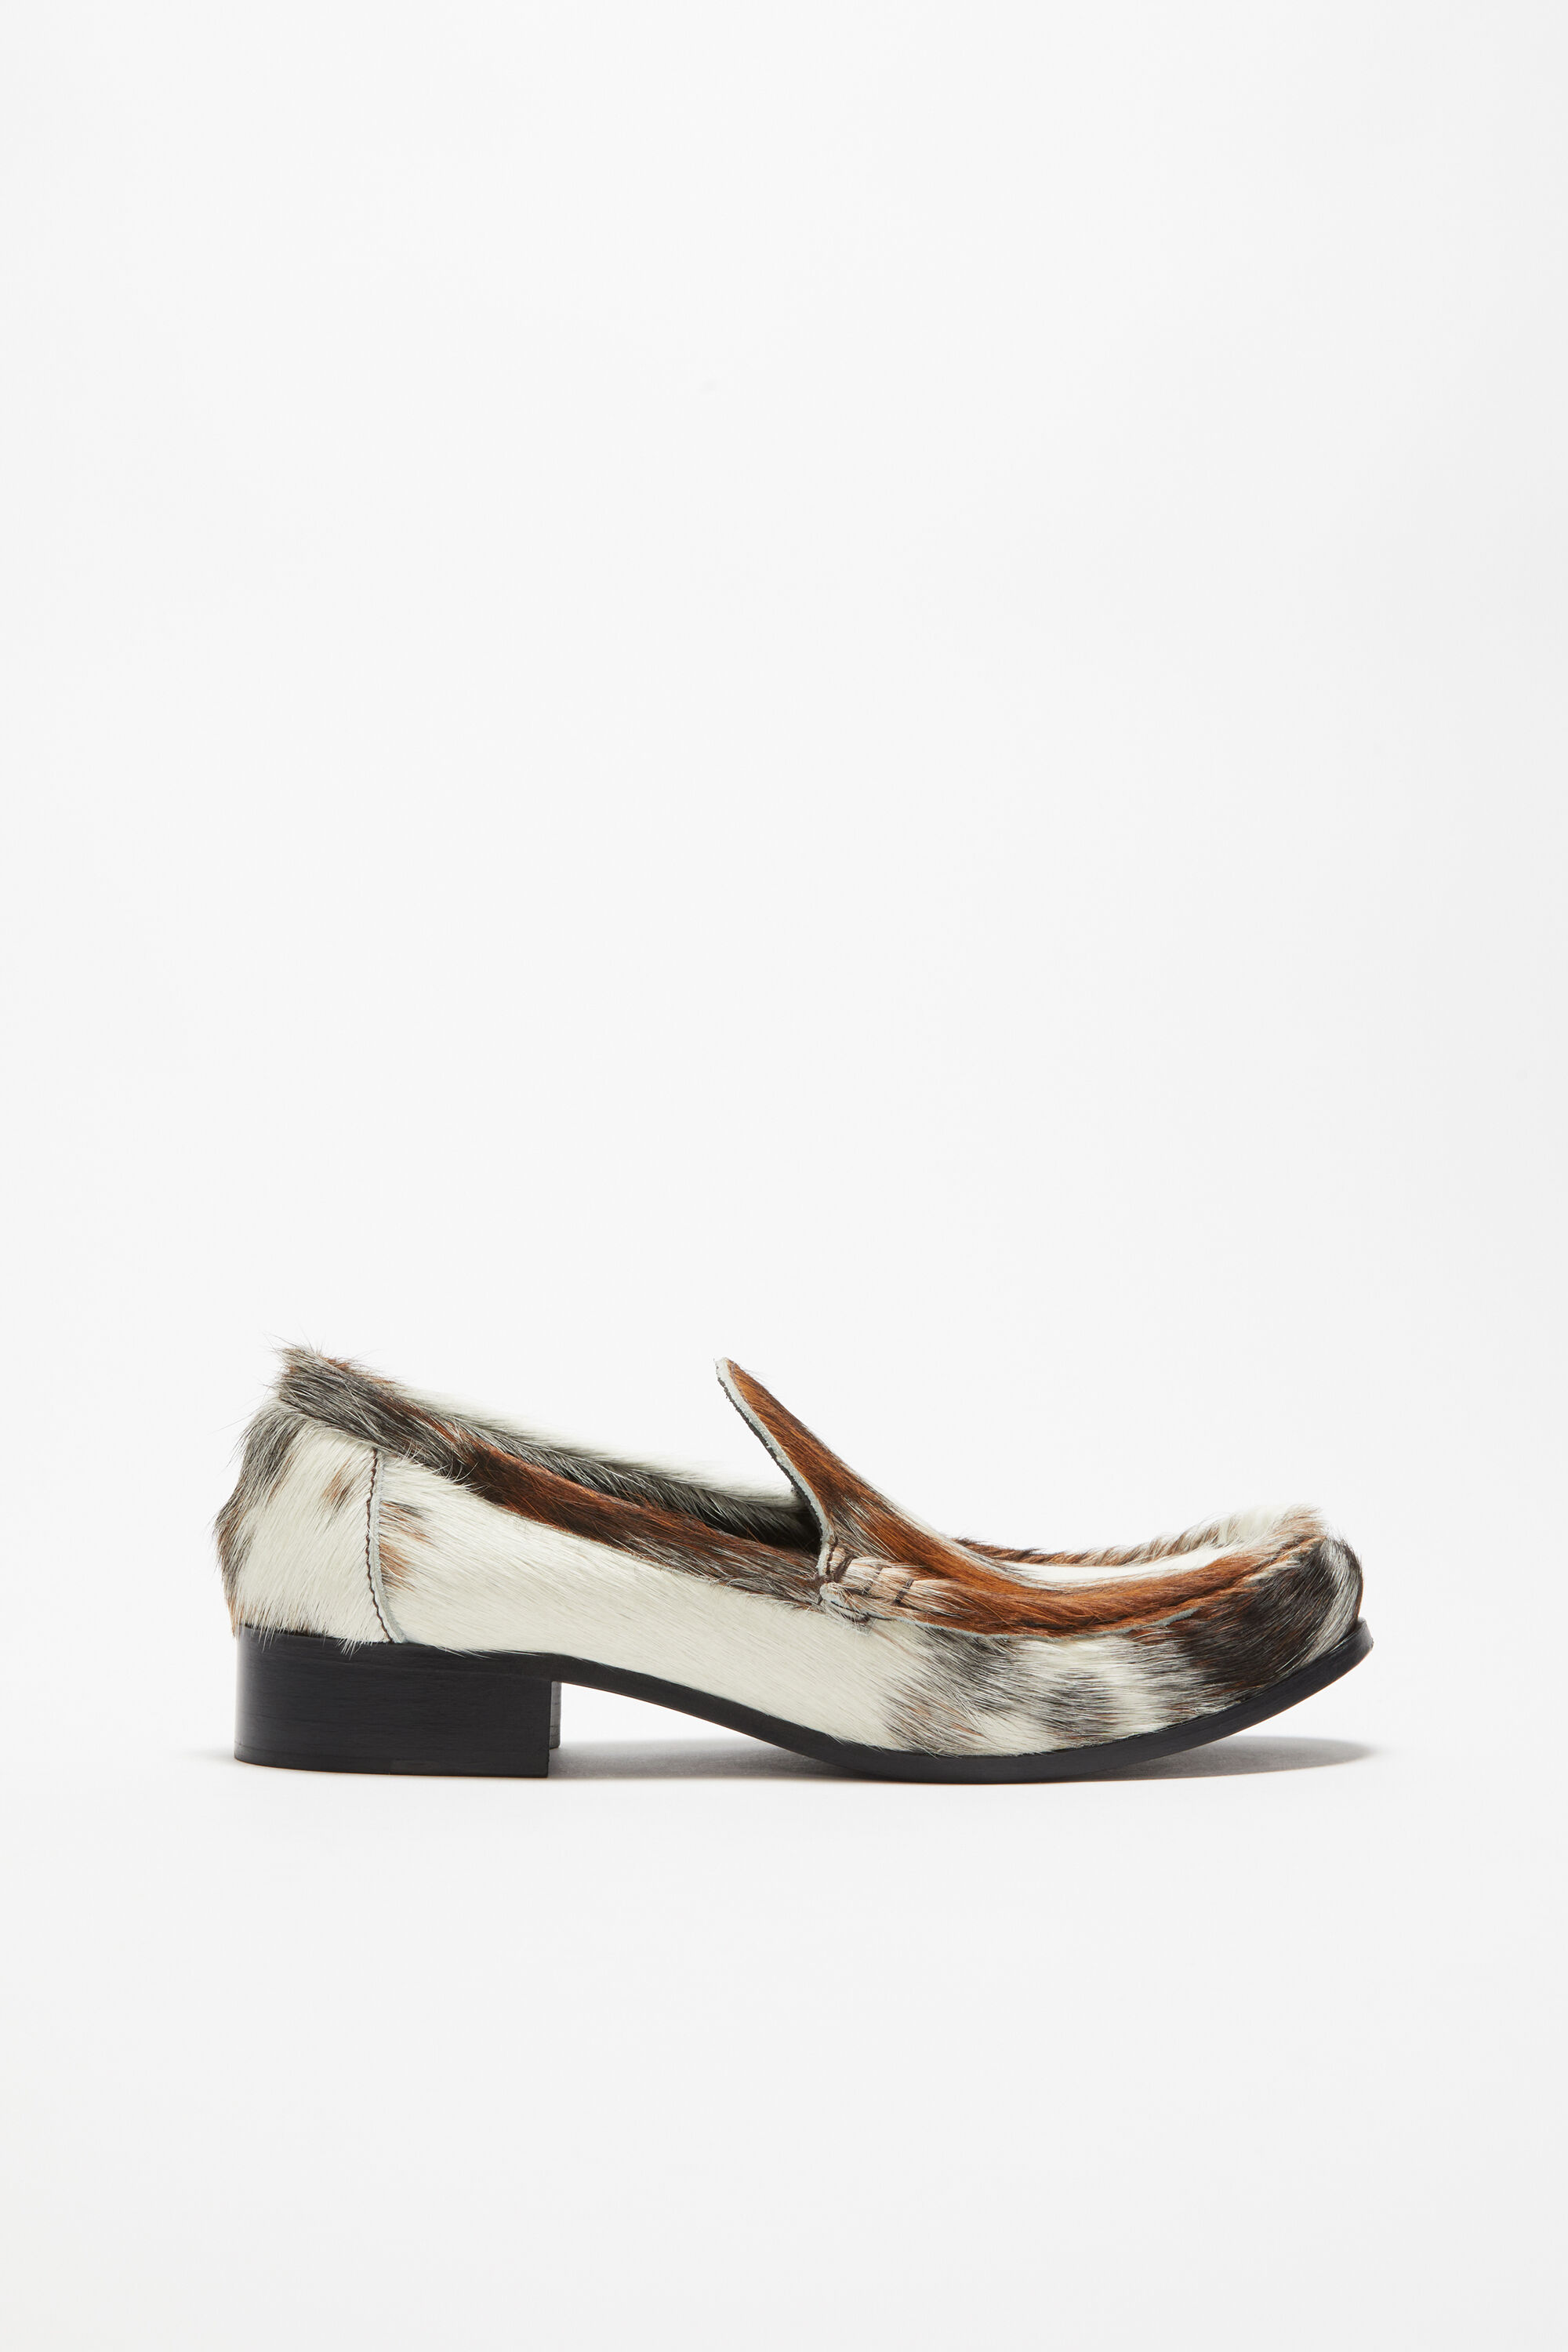 Acne Studios - Leather loafers - Multi brown